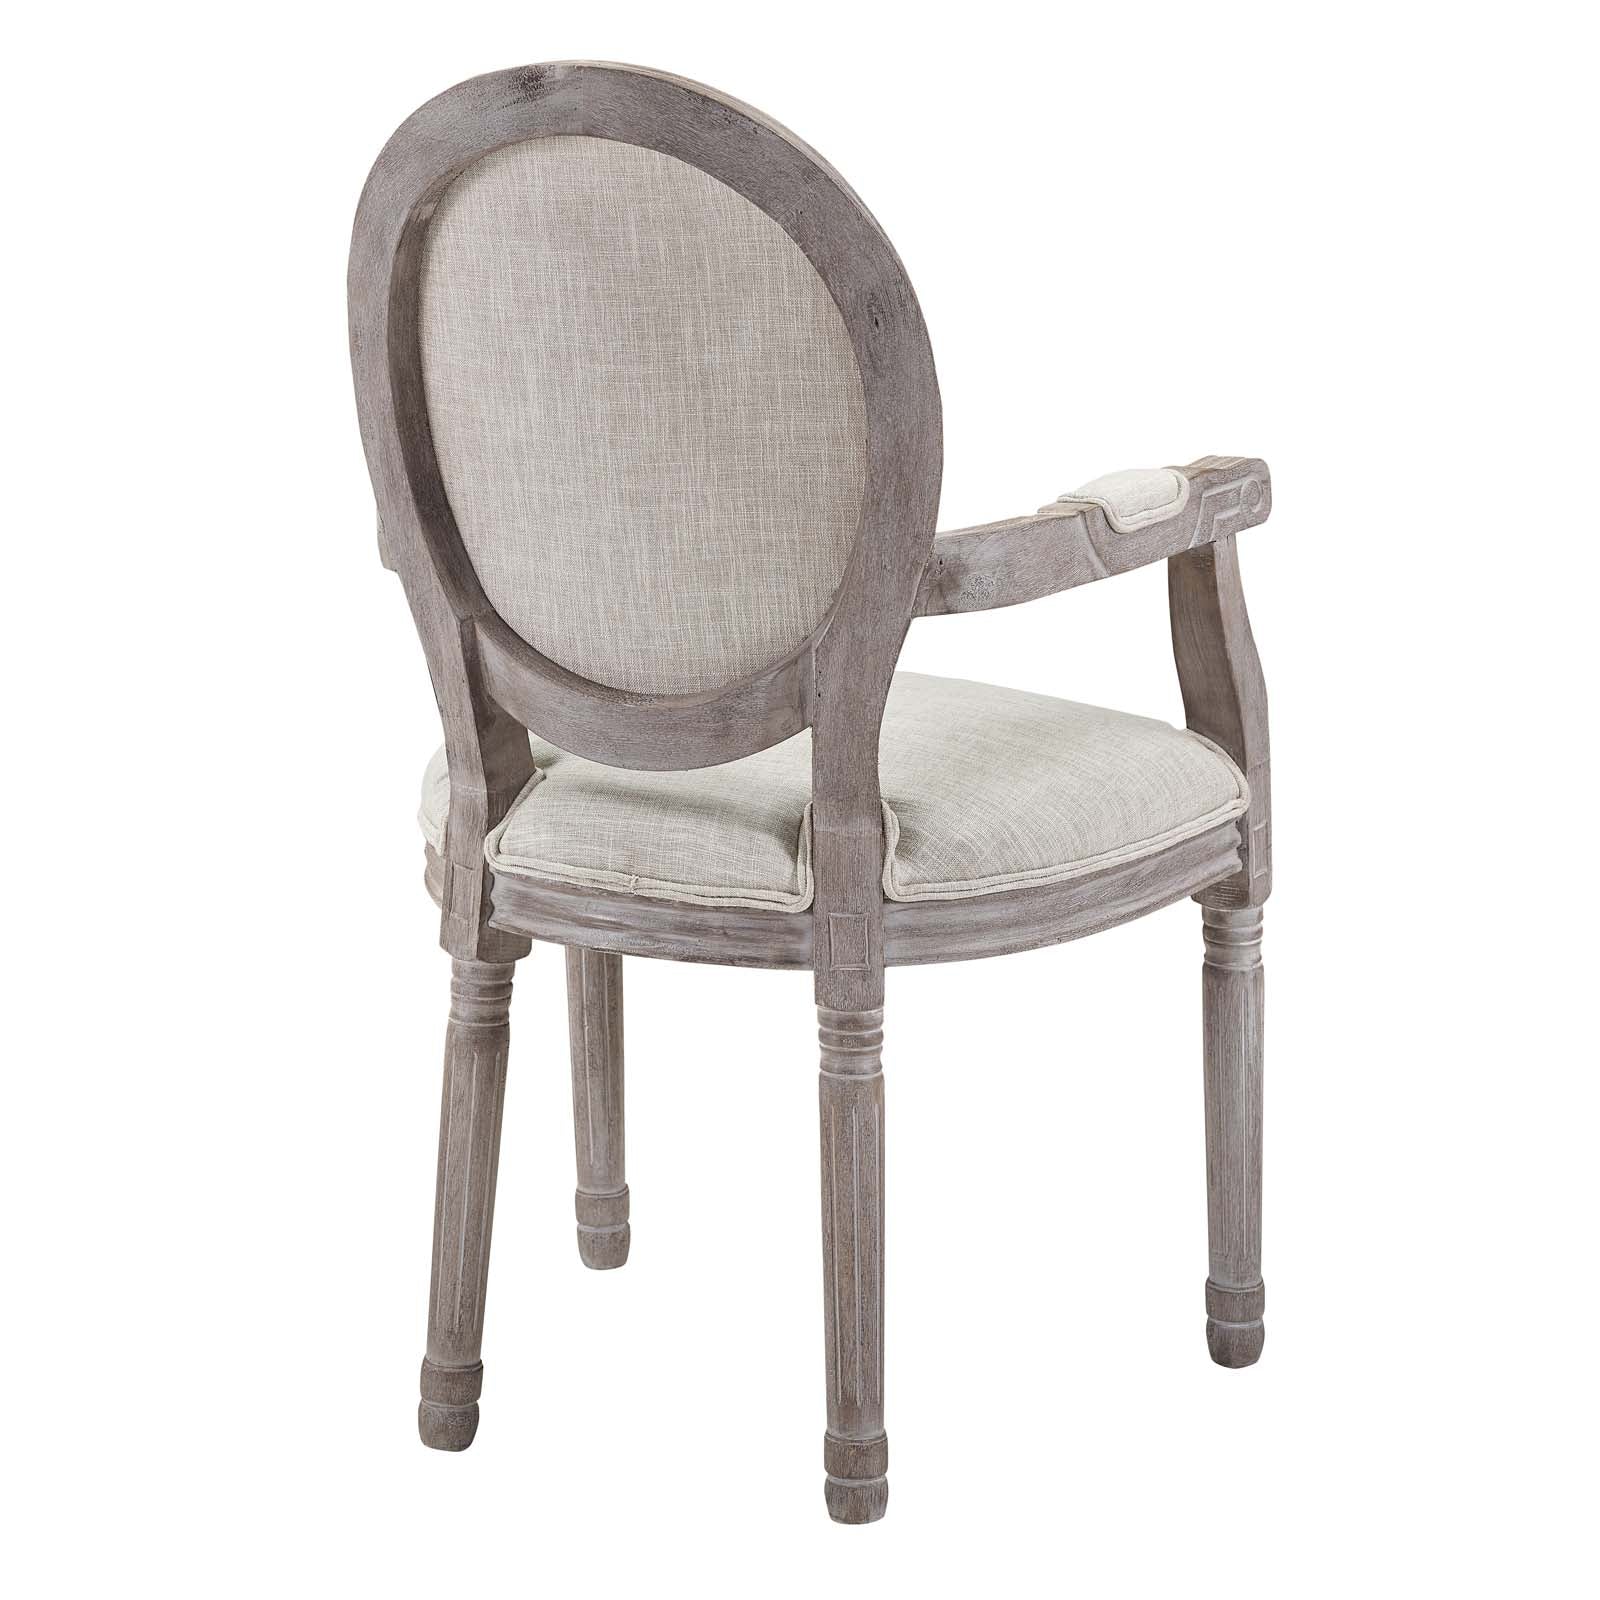 Arise Vintage French Dining Armchair - East Shore Modern Home Furnishings